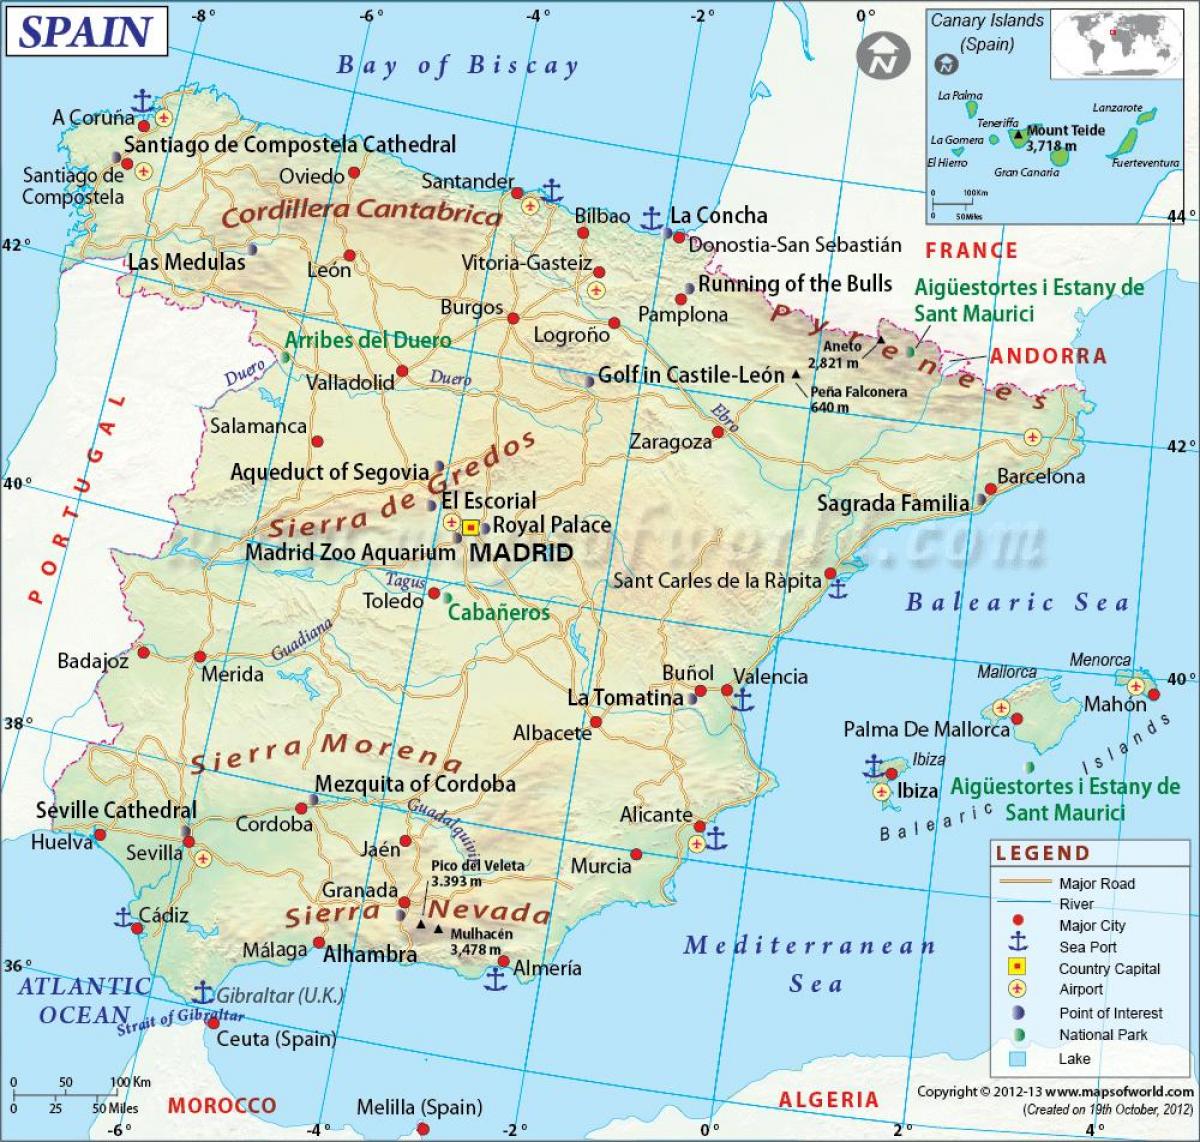 map of Spain showing major cities